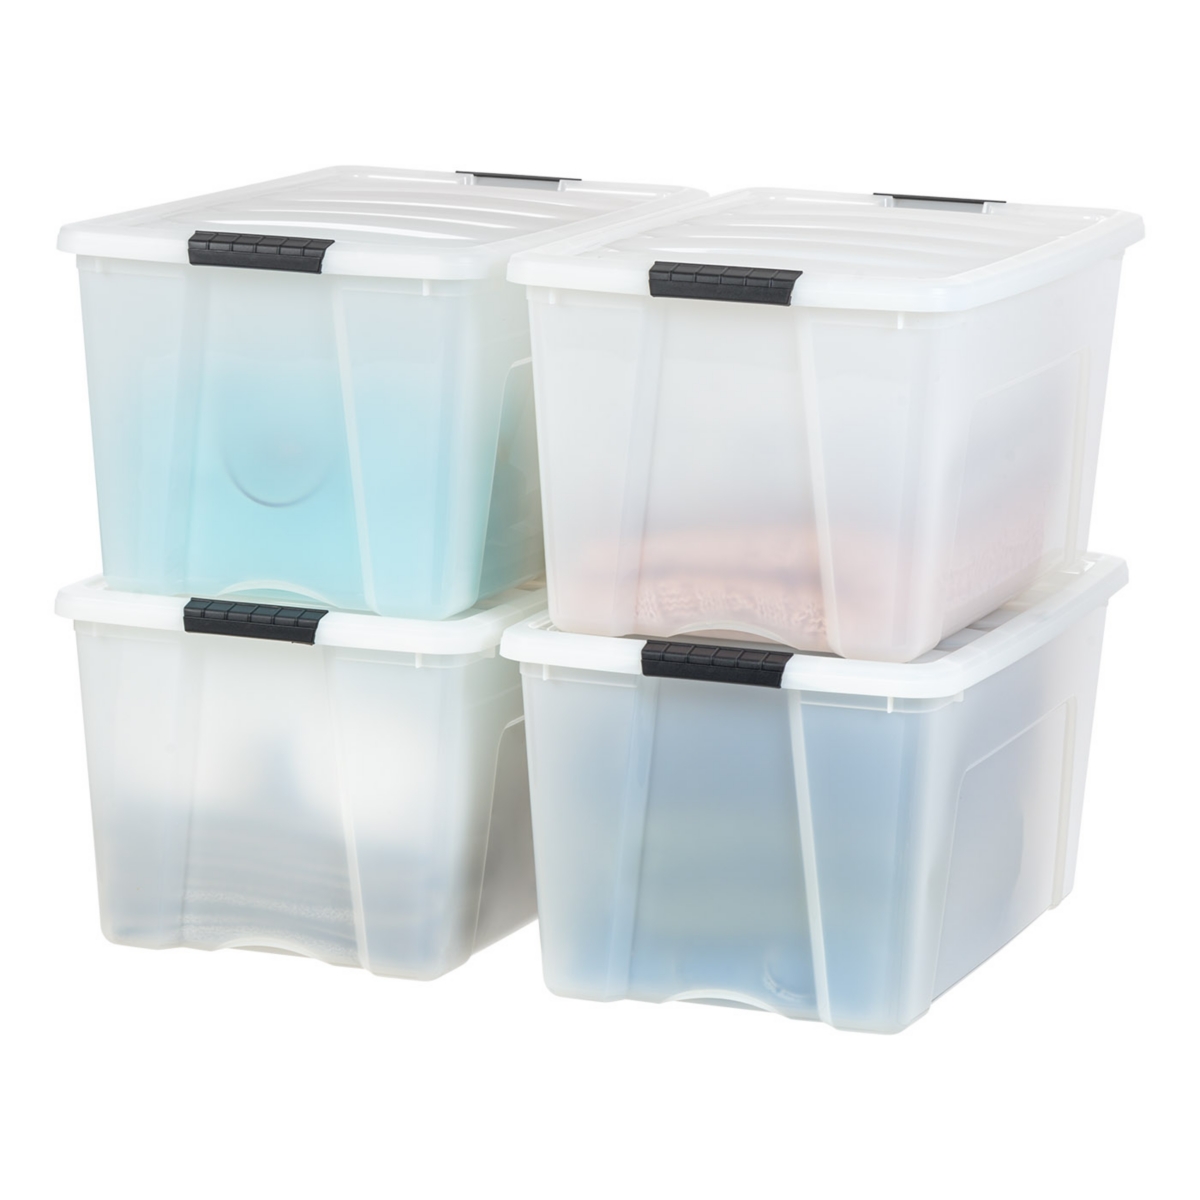 4 Pack 72qt Plastic Storage Bin with Lid and Secure Latching Buckles, Pearl